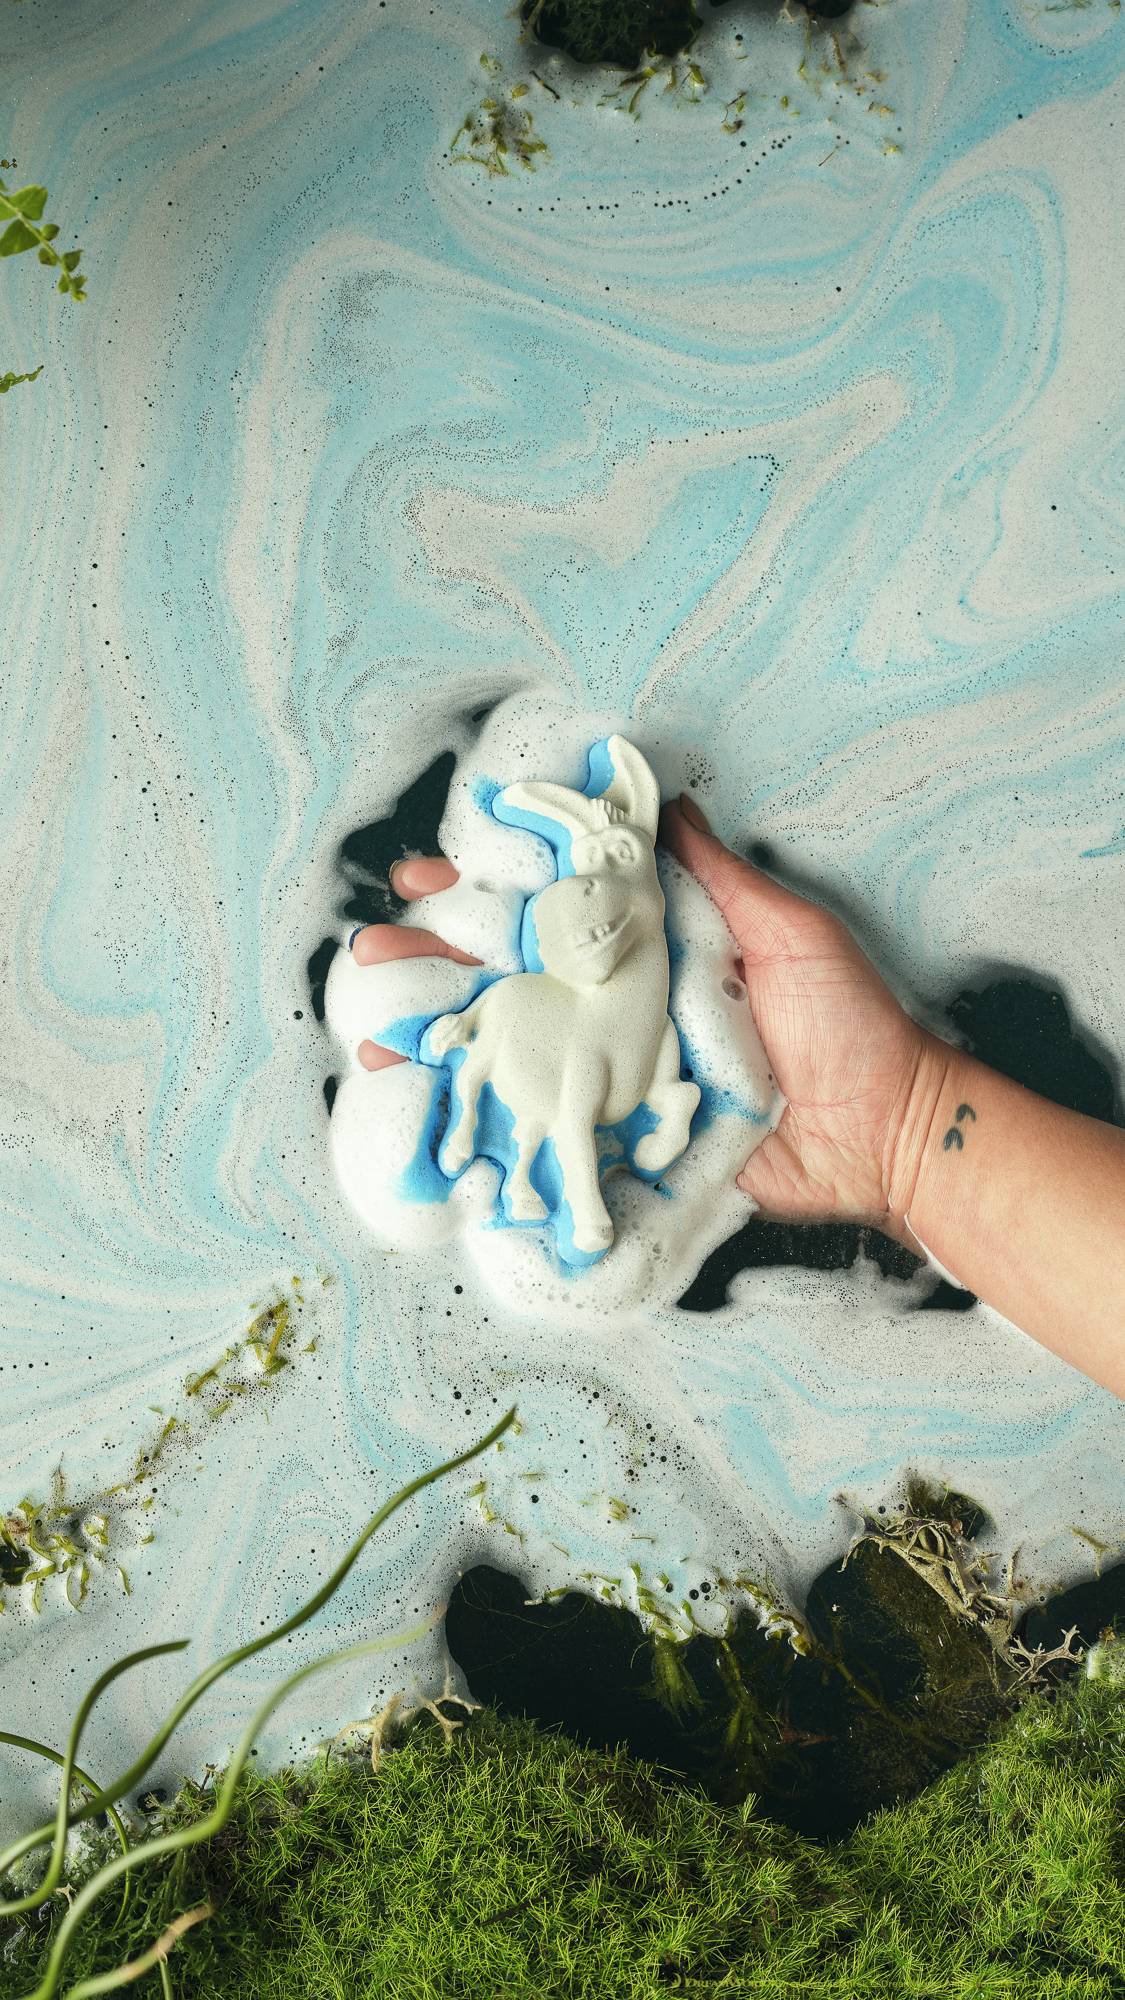 The image shows the model's forearm and hand as they hold the Donkey bath bomb just sitting in the ocean-like swirls of blue and white foamy water below. Moss and leaf foliage surround the border. 